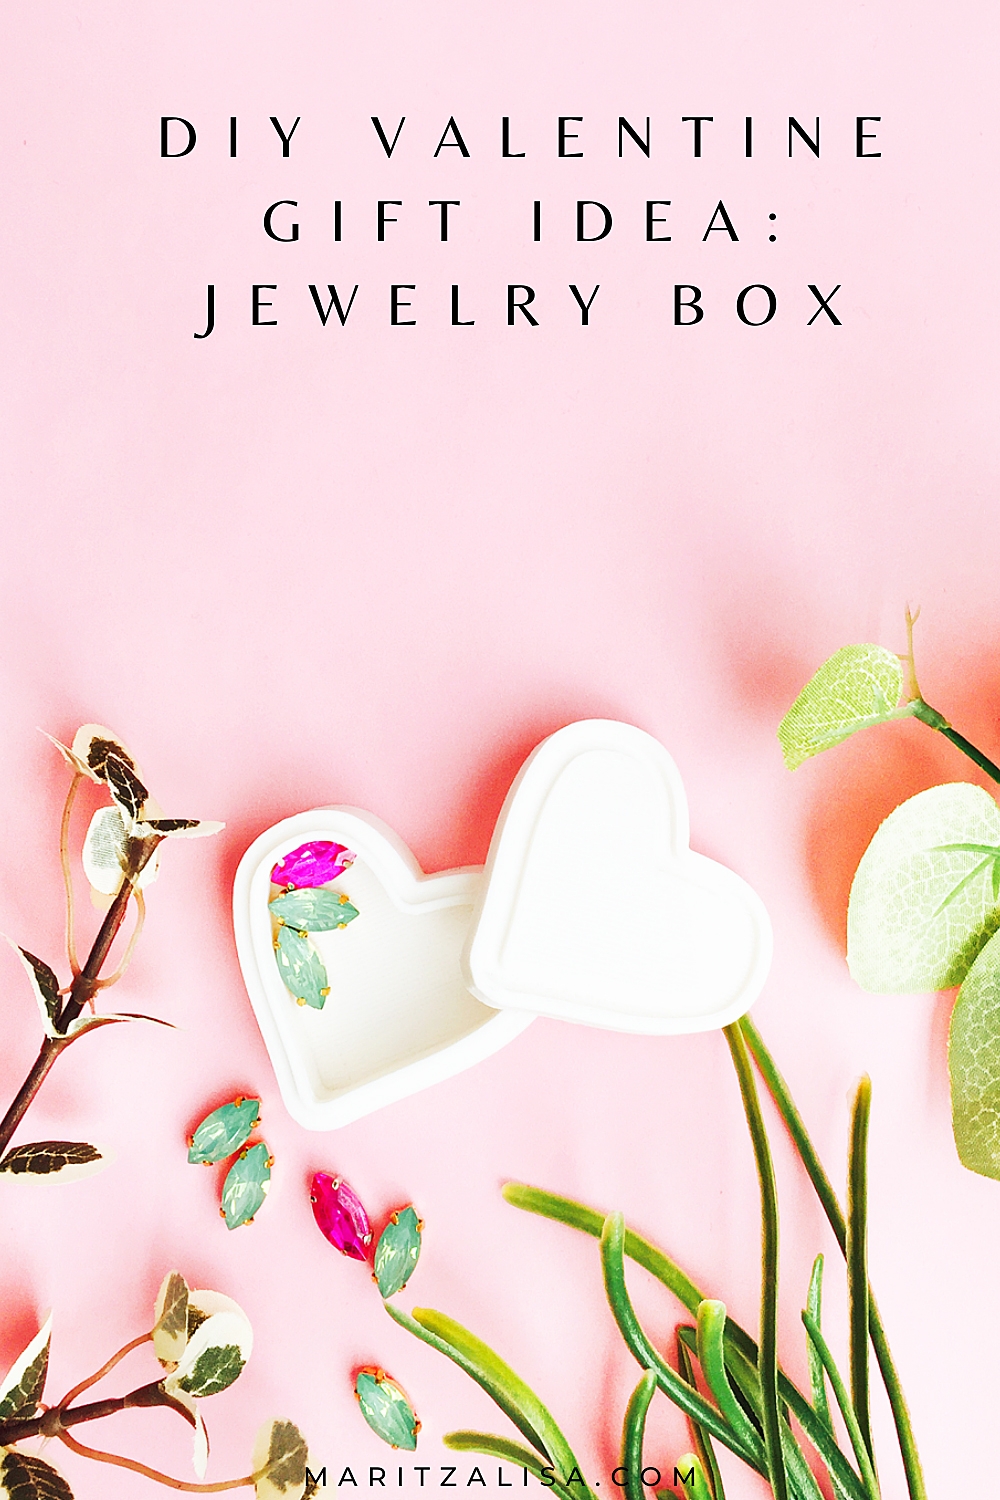 How to Make a Valentine's Gift - Jewelry Box 